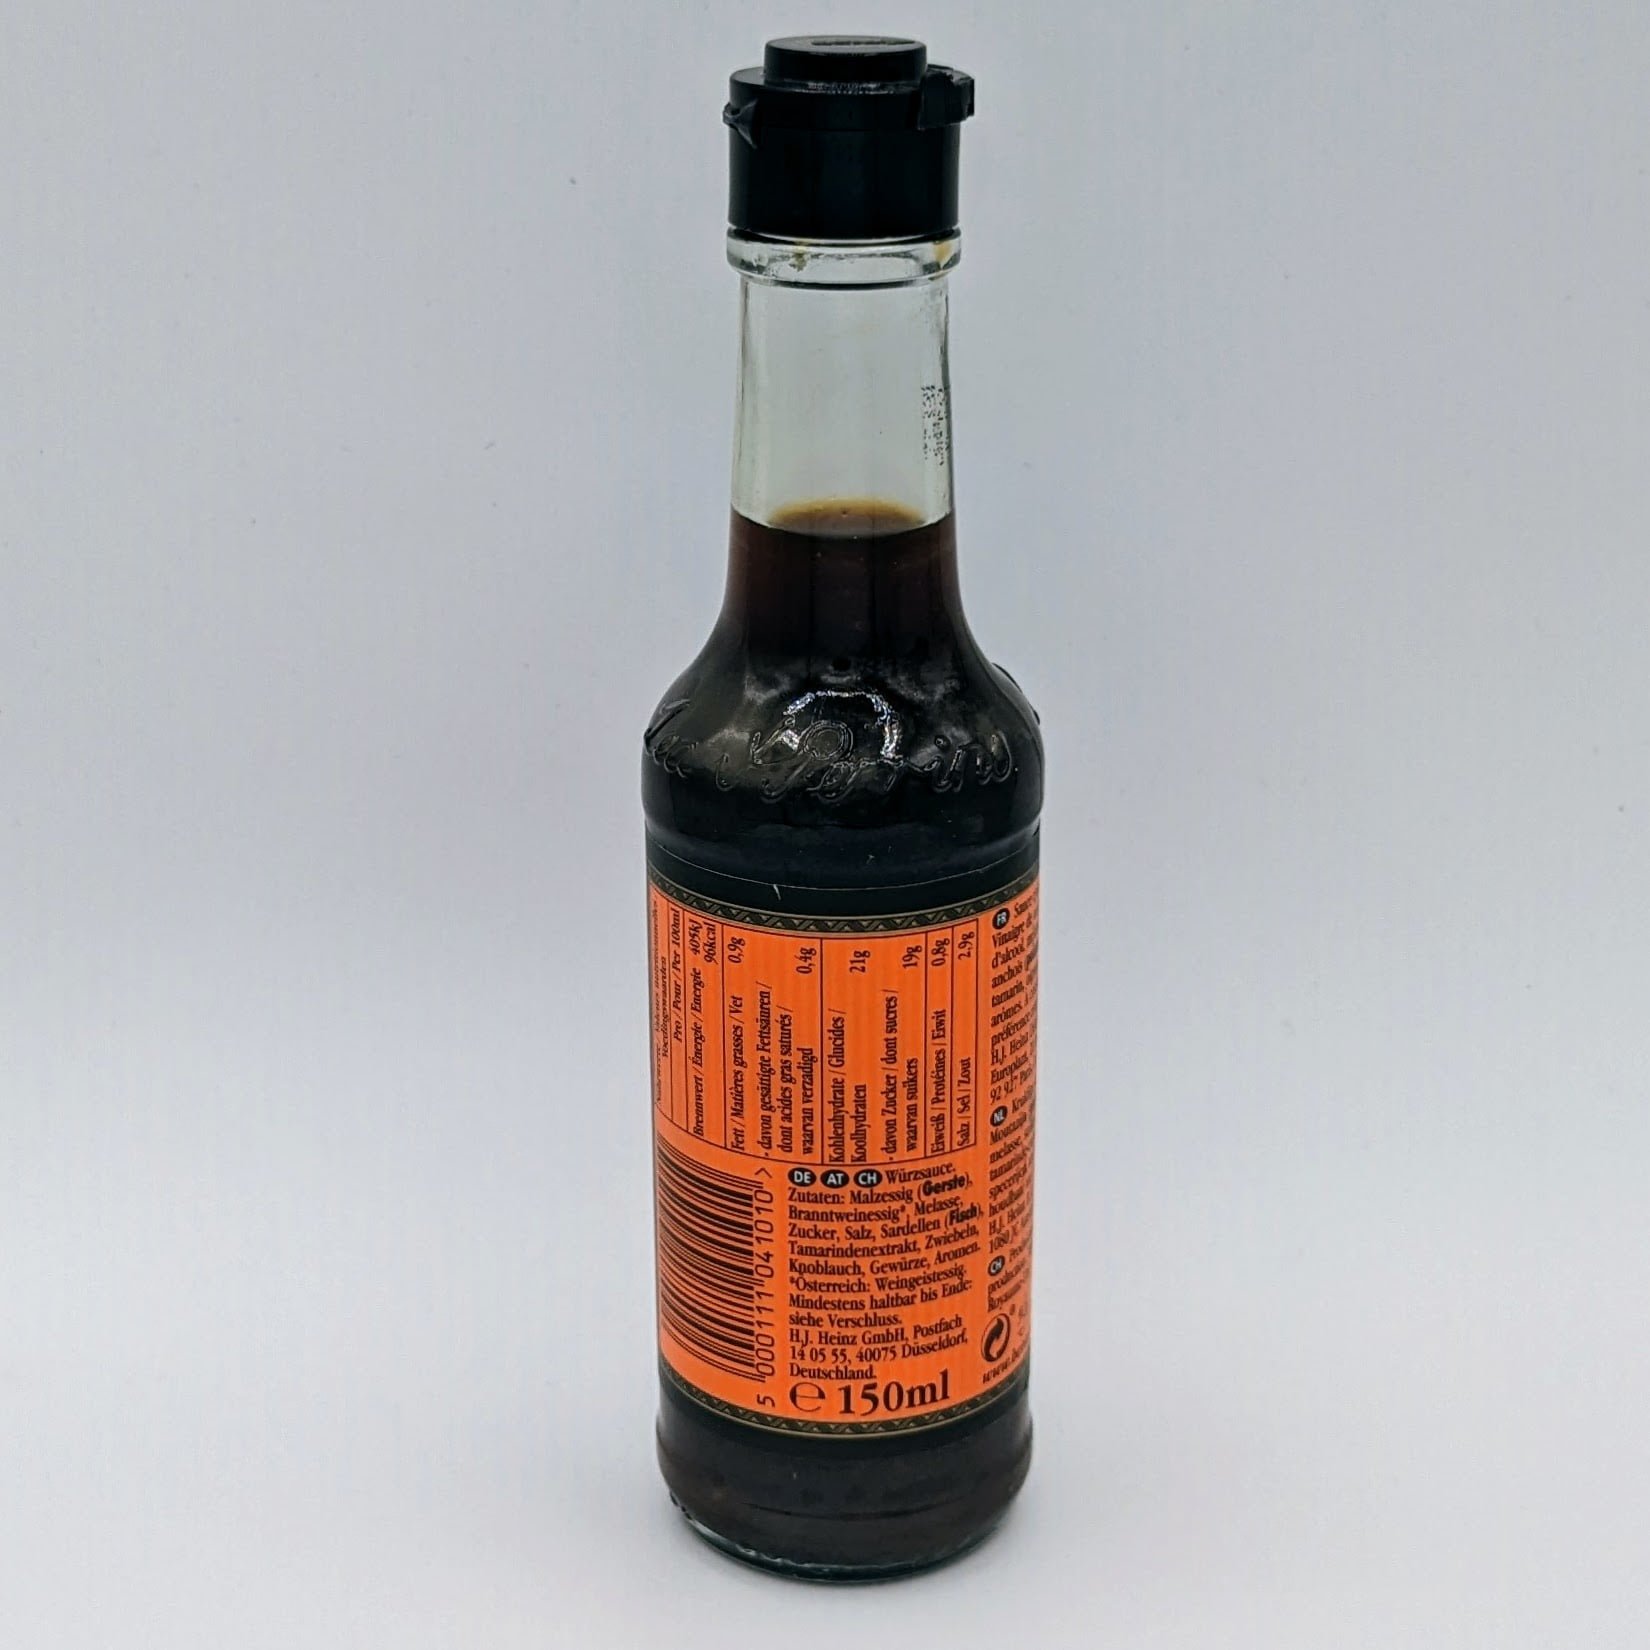 What Is Worcestershire Sauce, and Where Did It Come From?